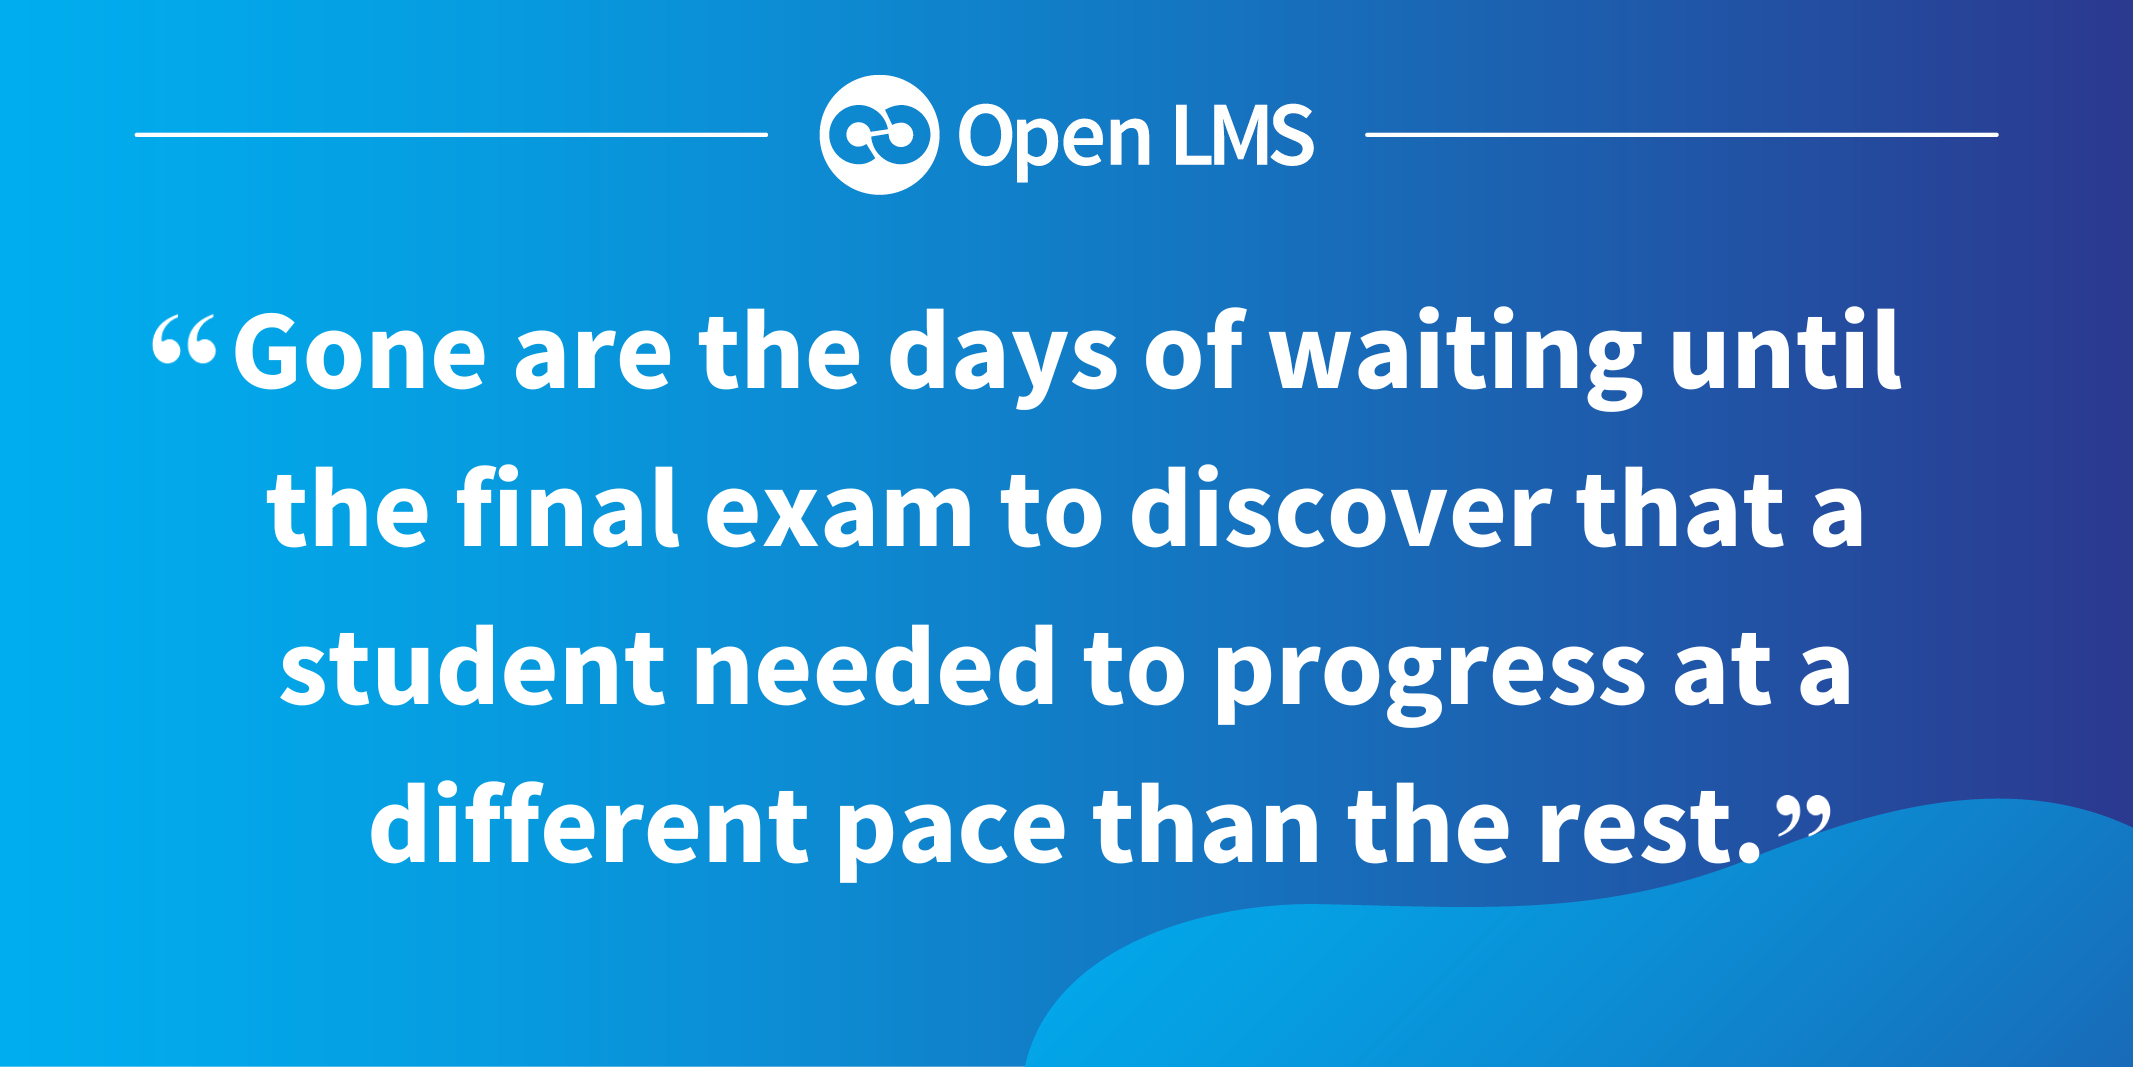 Gone are the days of waiting until the final exam to discover that a student needed to progress at a different pace than the rest